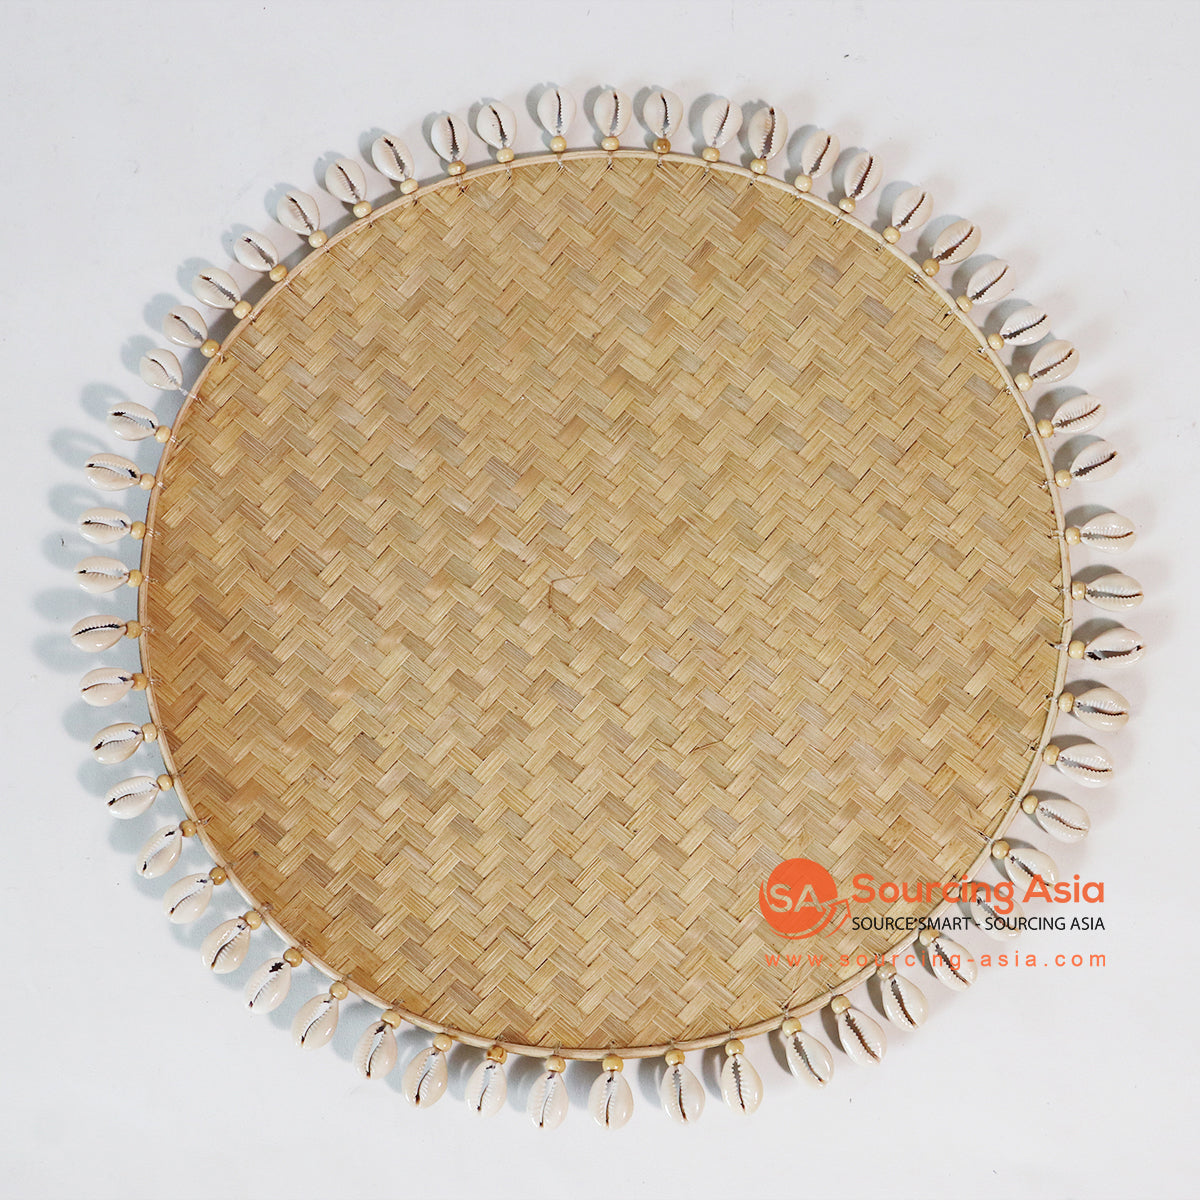 MTIC030-1 NATURAL WOVEN BAMBOO PLACEMAT WITH SHELL FRINGE